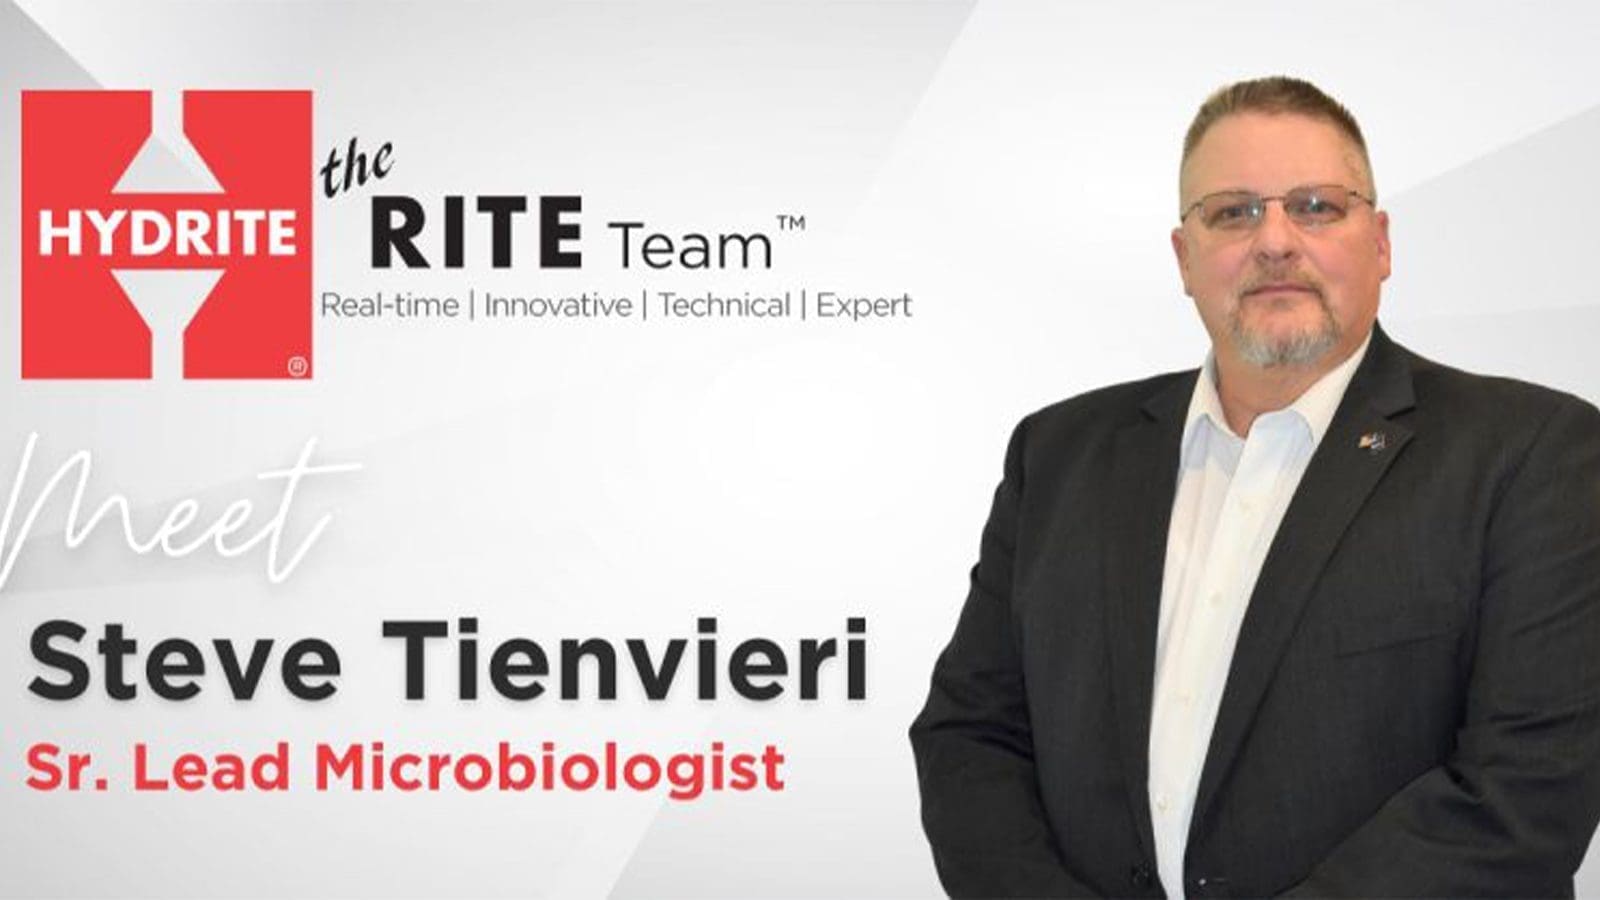 Steve Tienvieri brings over two decades of experience to elevate food safety at Hydrite